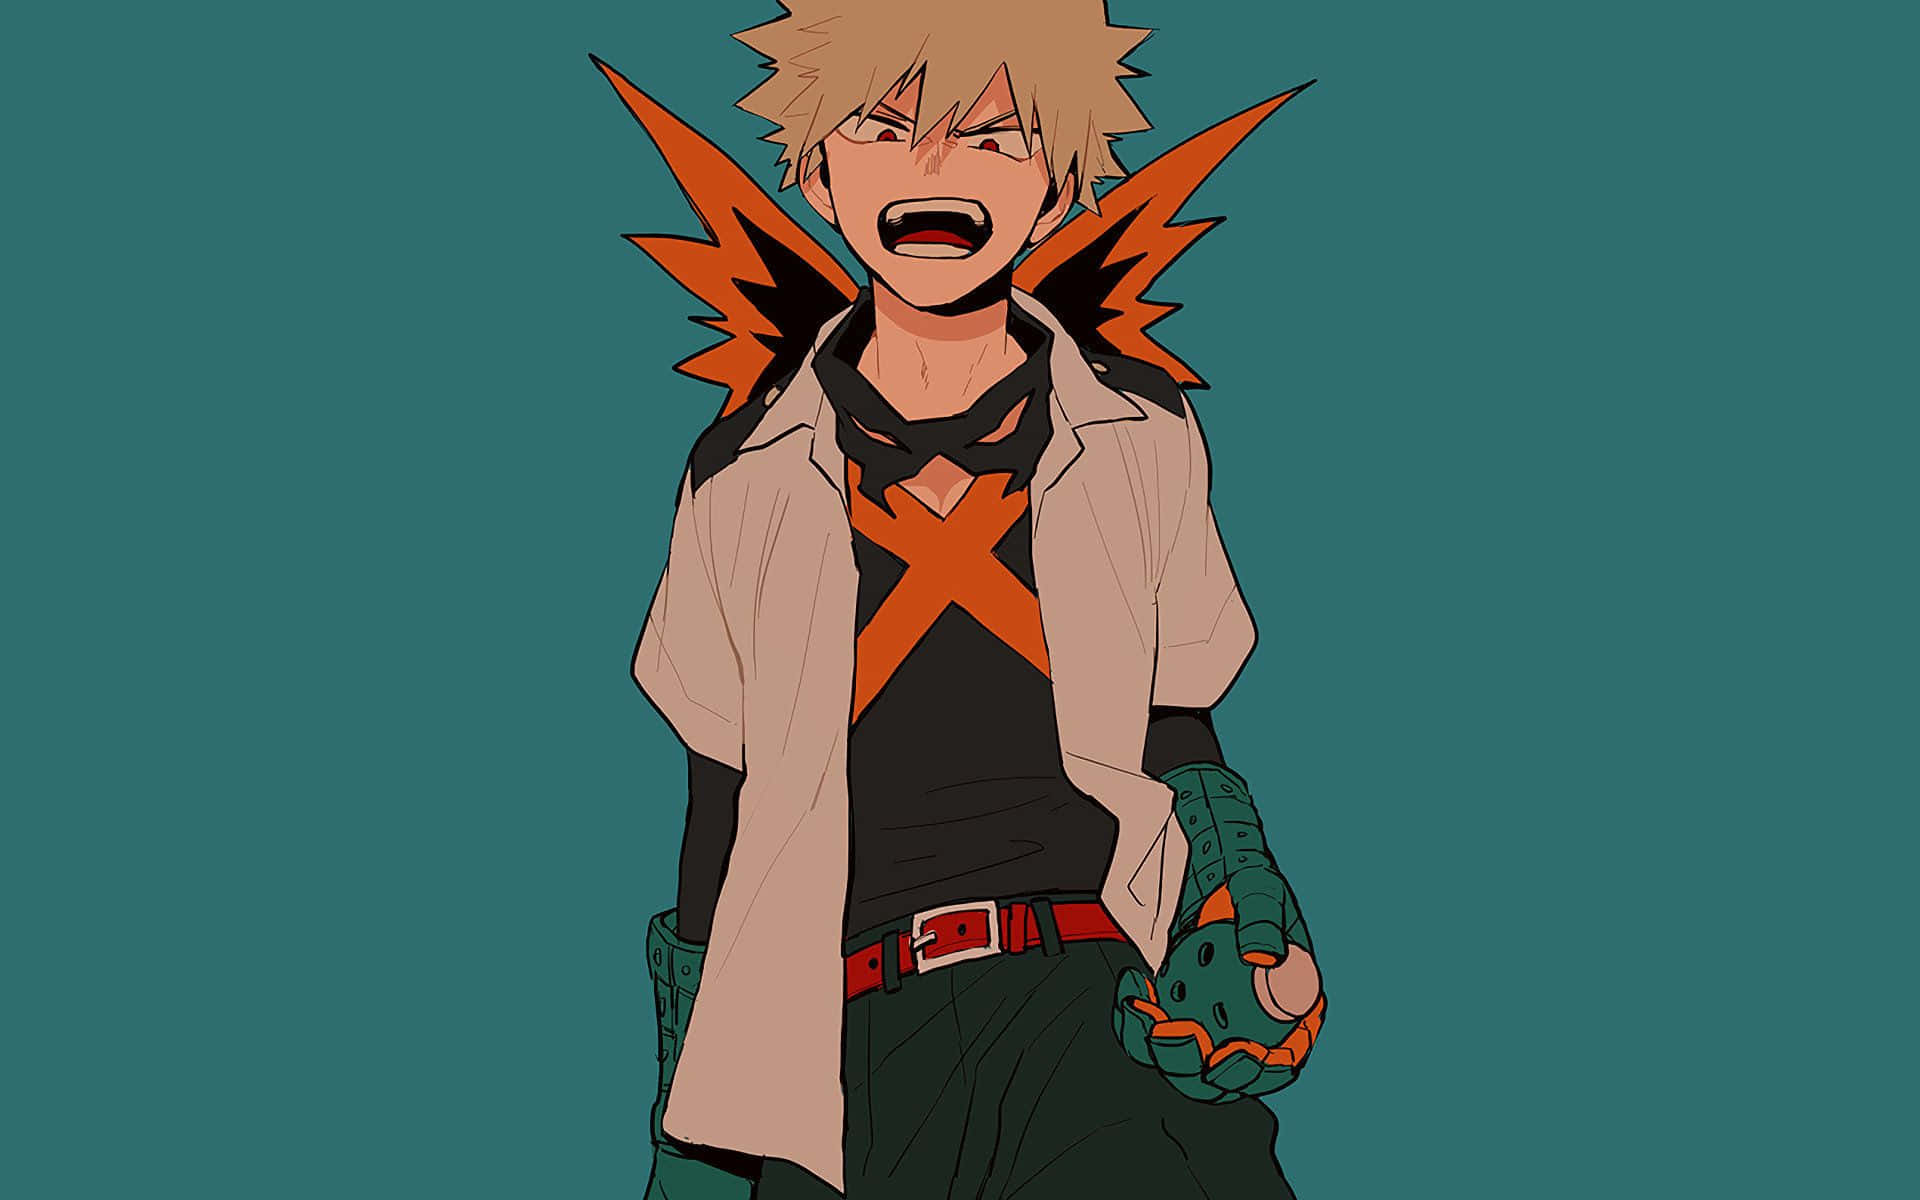 Bakugou Katsuki Stands Confidently With A Determined Look